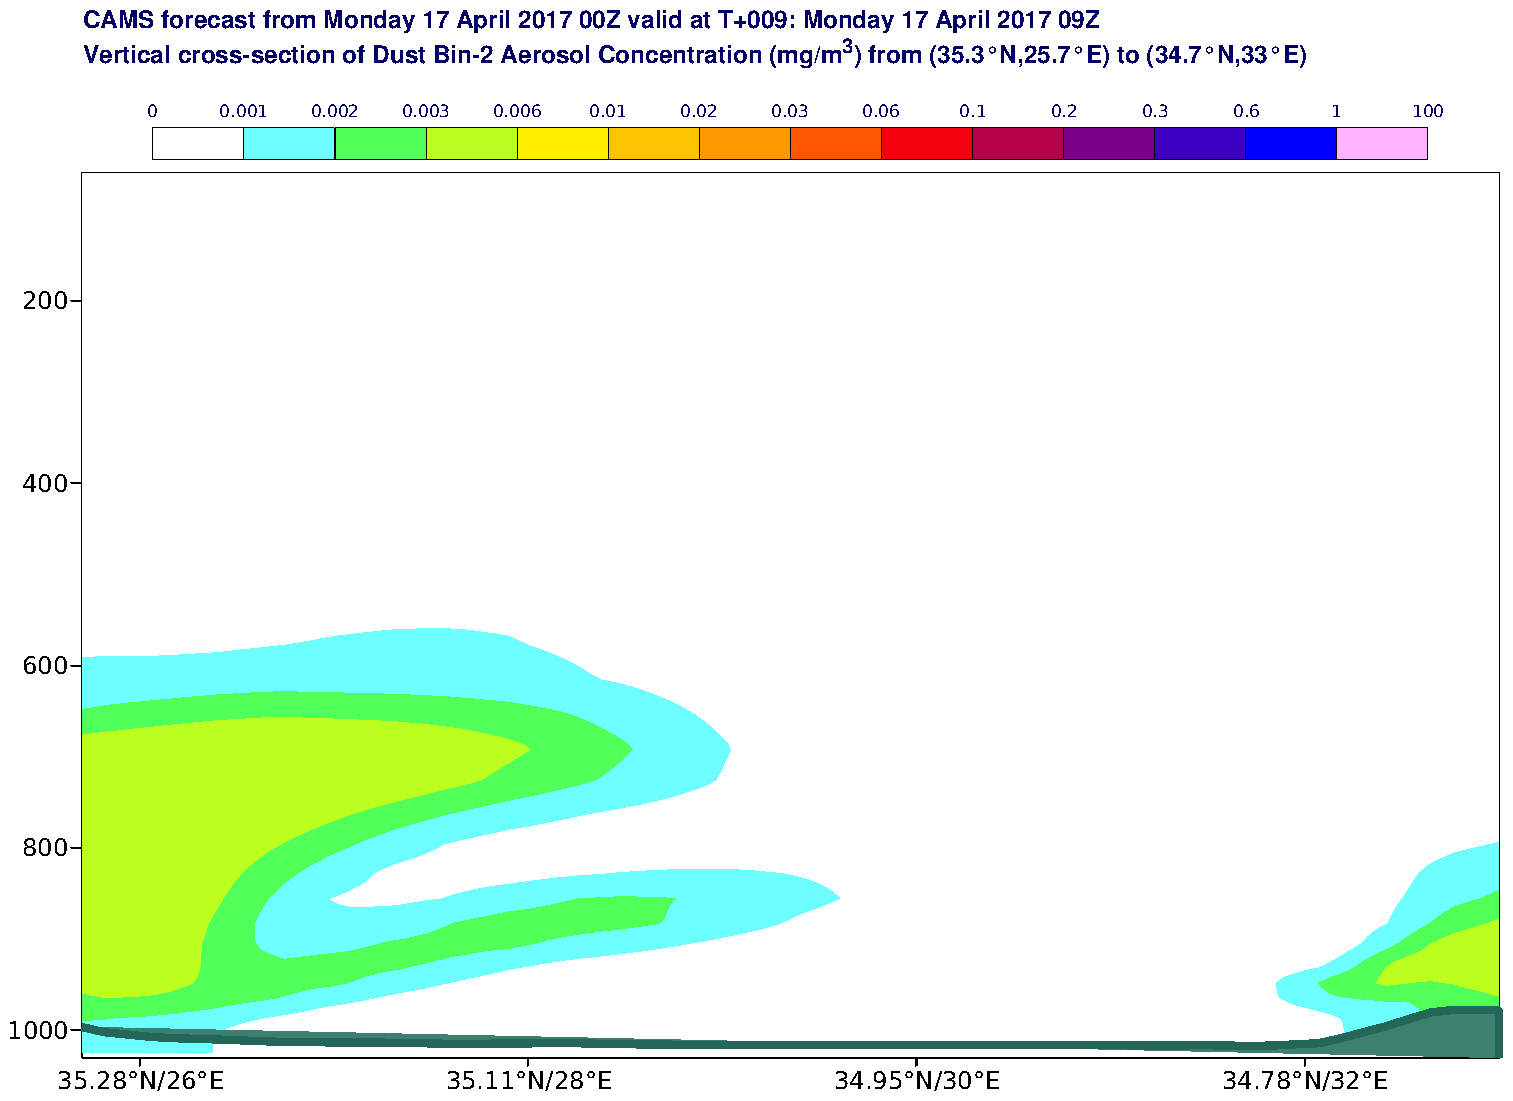 Vertical cross-section of Dust Bin-2 Aerosol Concentration (mg/m3) valid at T9 - 2017-04-17 09:00